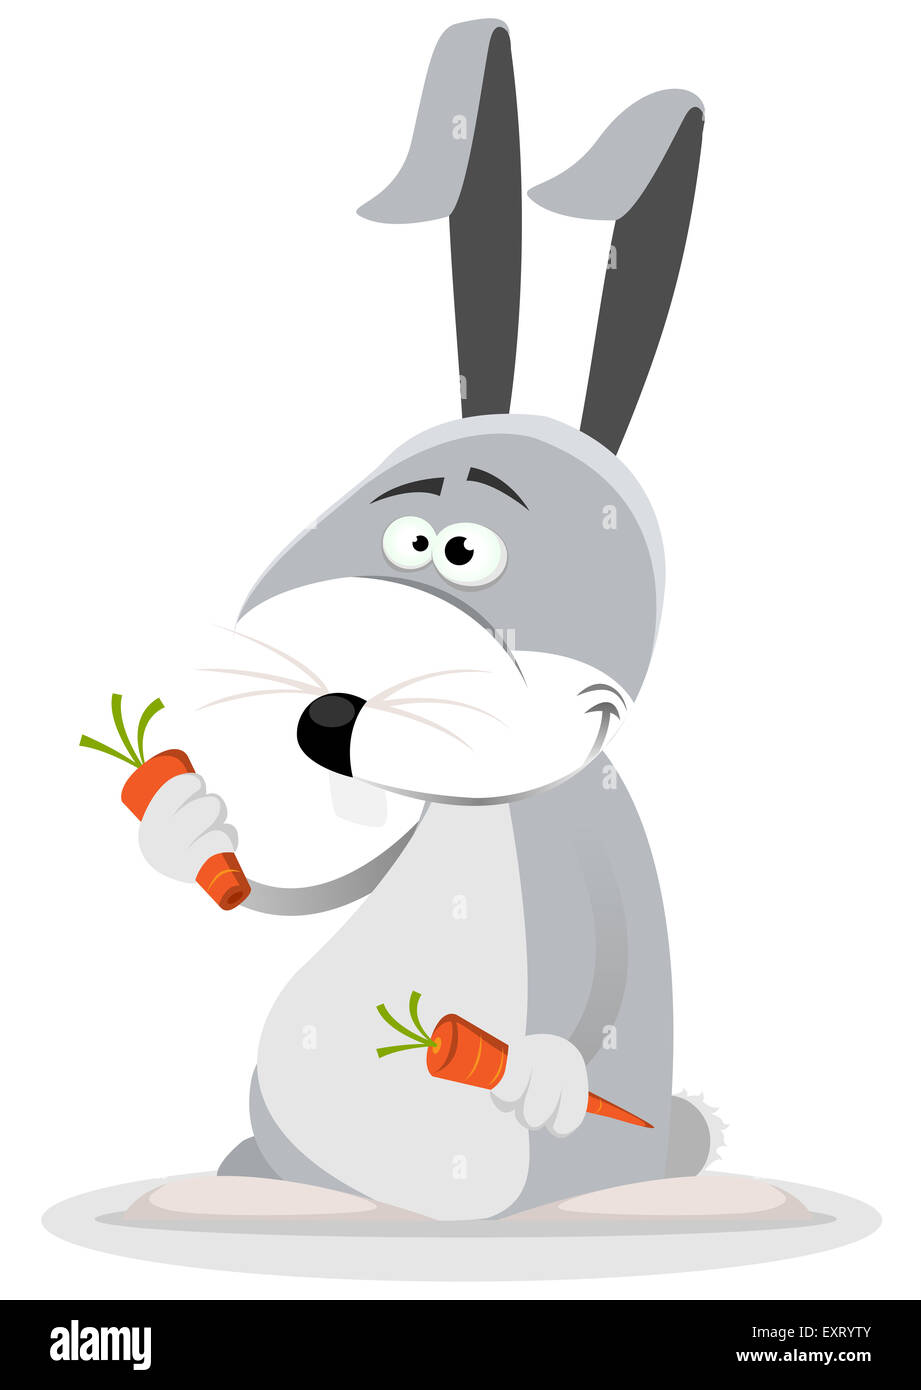 Illustration of a cartoon bunny character eating  and holding carrots vegetables for lunch Stock Photo